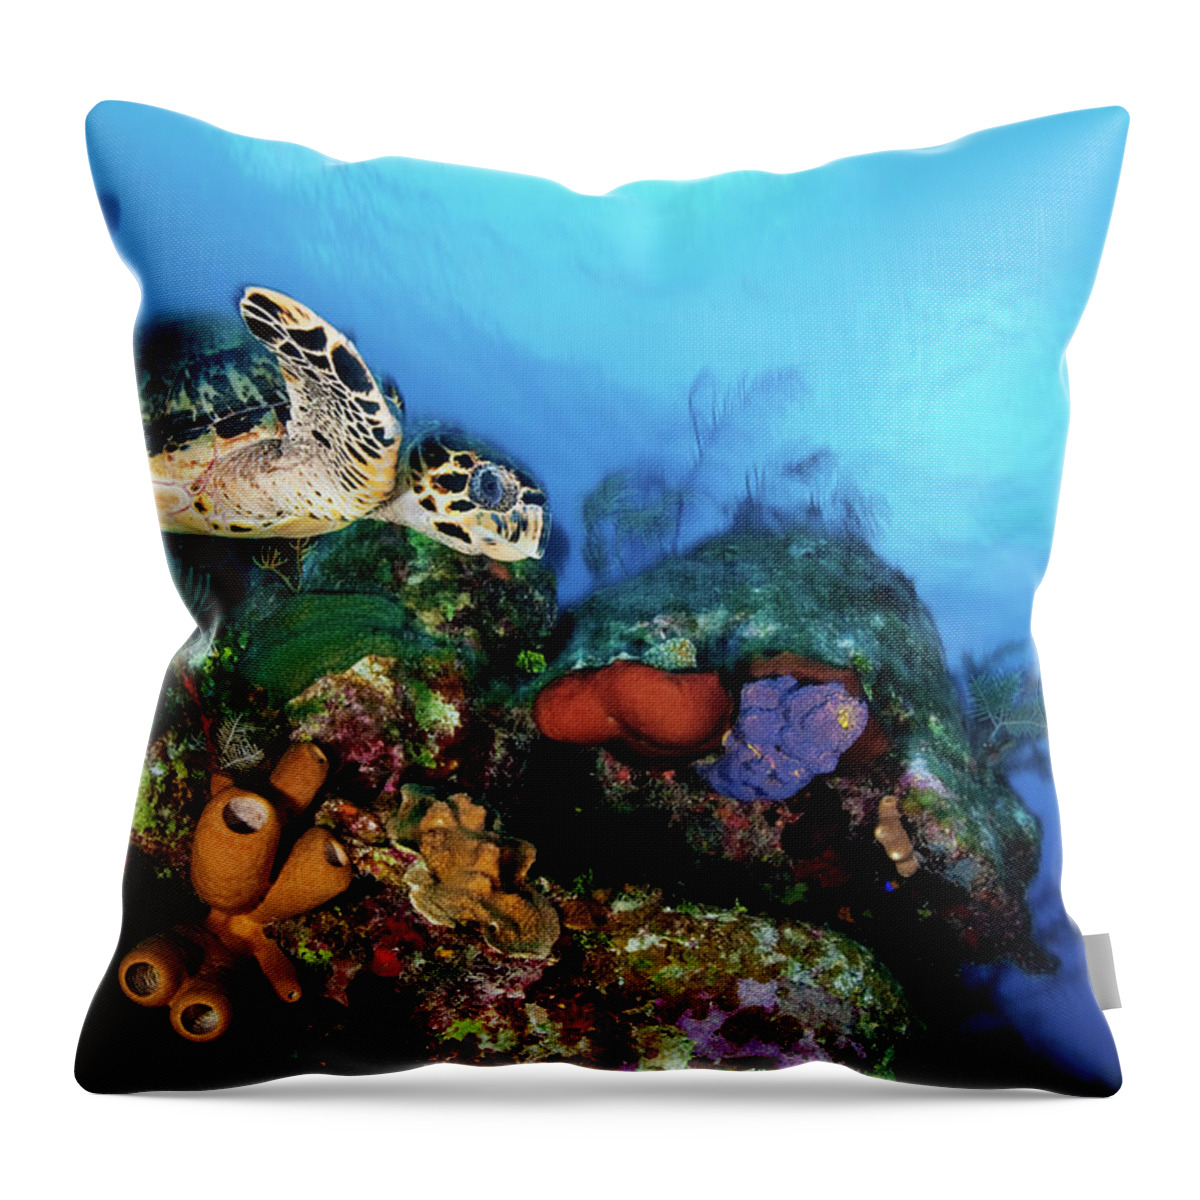 Underwater Throw Pillow featuring the photograph Full Speed Ahead by Extreme-photographer